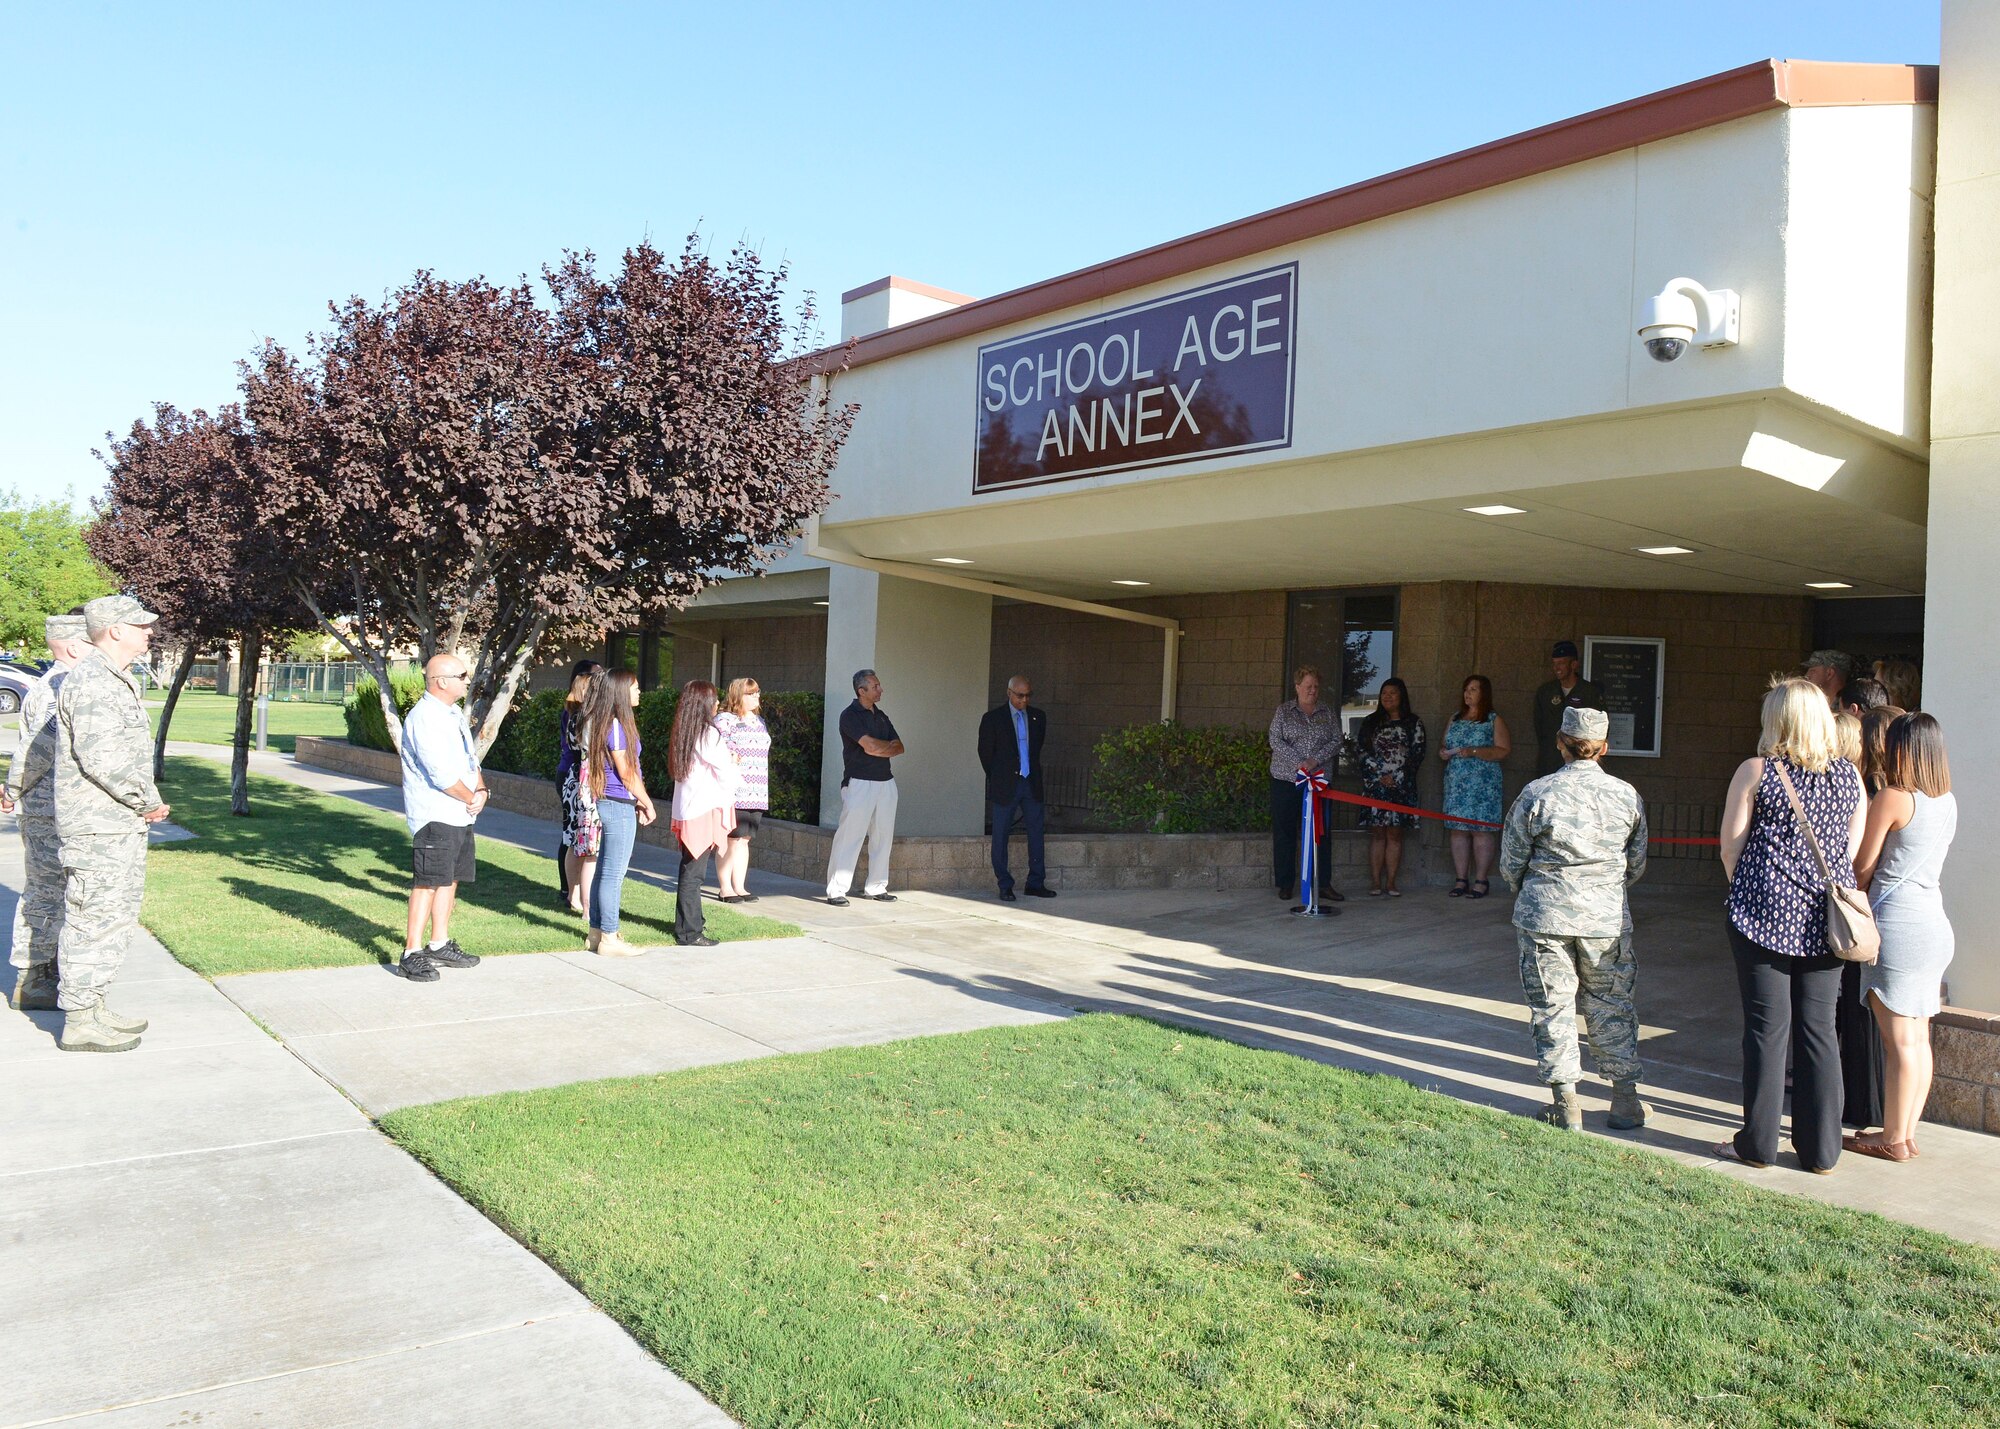 The recently renovated School Age Annex is located on Fitz-Gerald Blvd. in Bldg. 6459. Before and after school activities are offered to students from first to sixth grade.  (U.S. Air Force photo by Kenji Thuloweit)